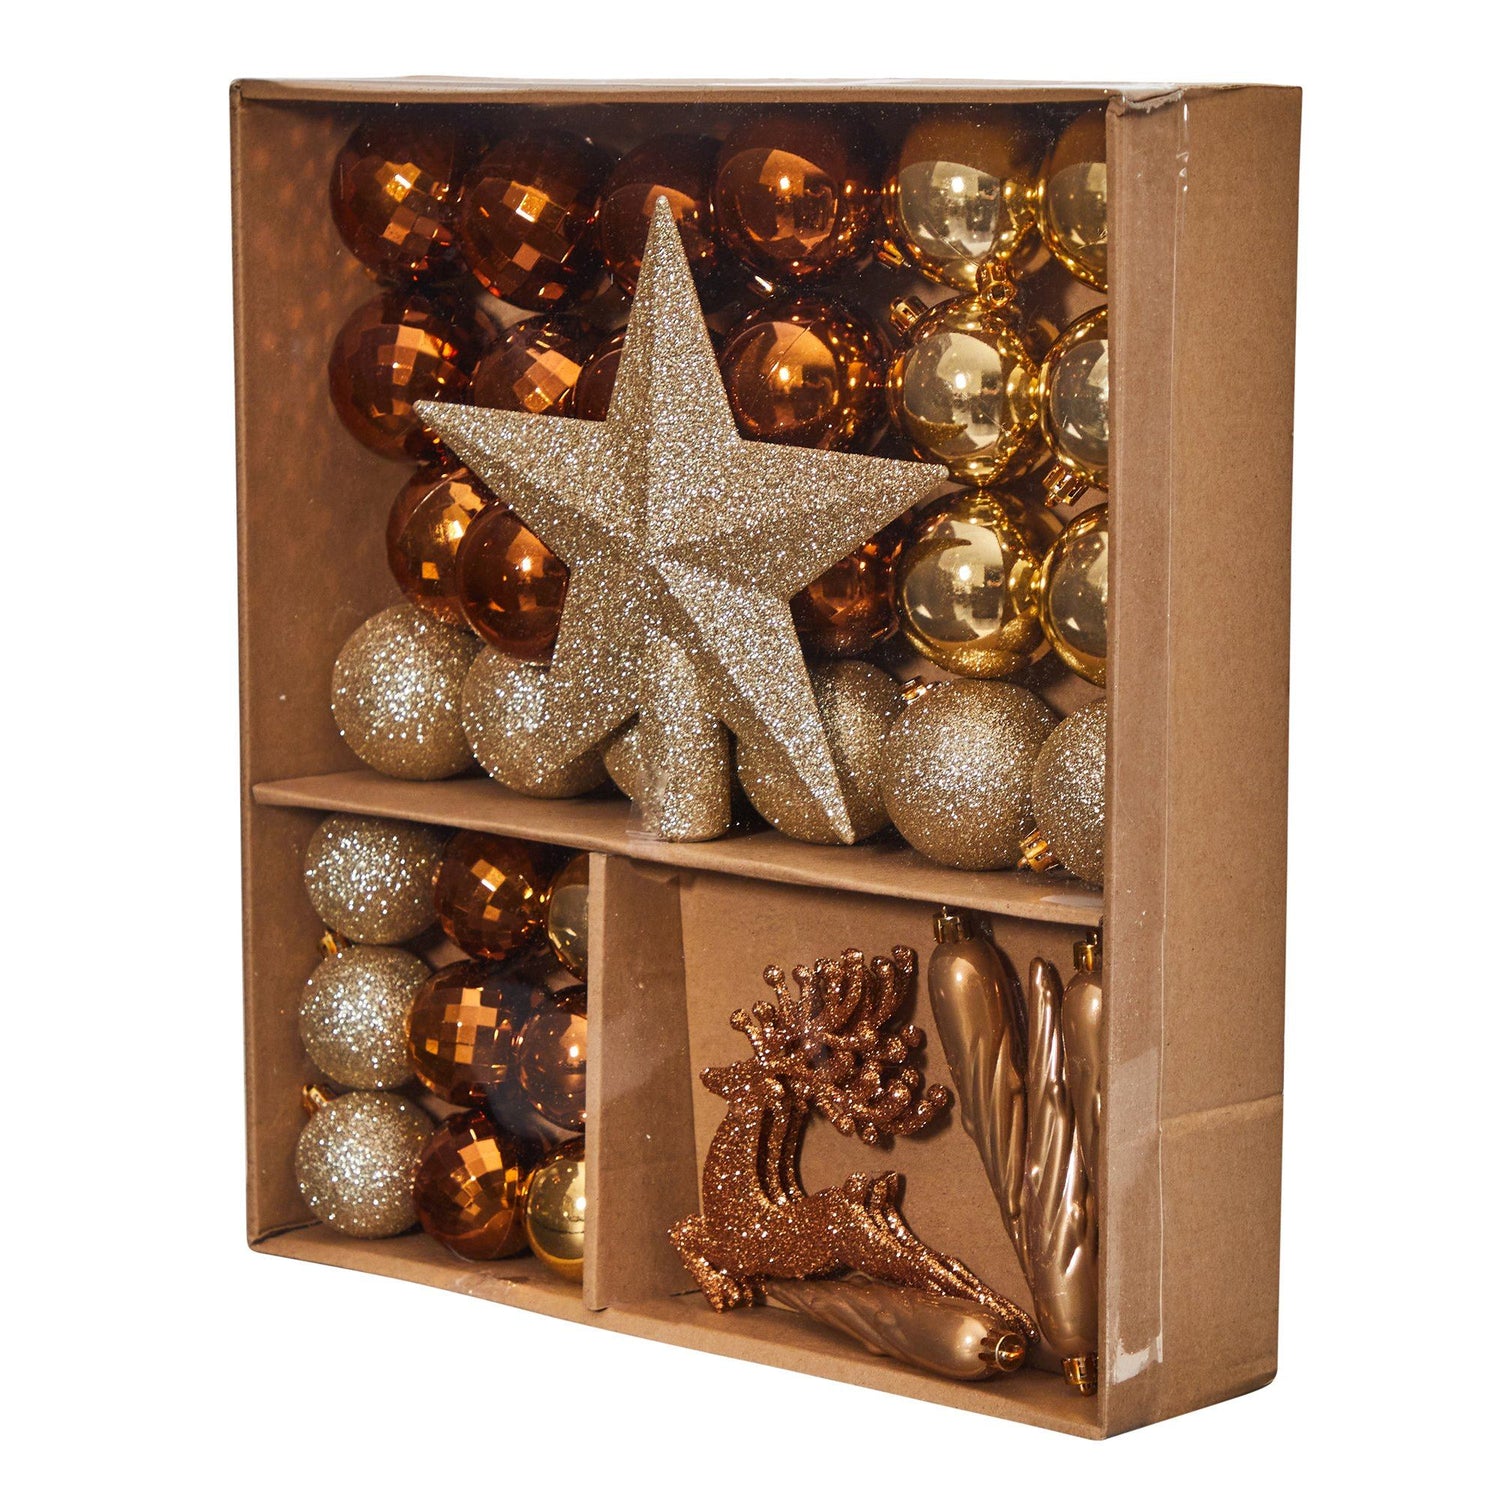 Holiday Christmas 40 Count Lux Shatterproof Ornament Set with Re-Useable Storage Container